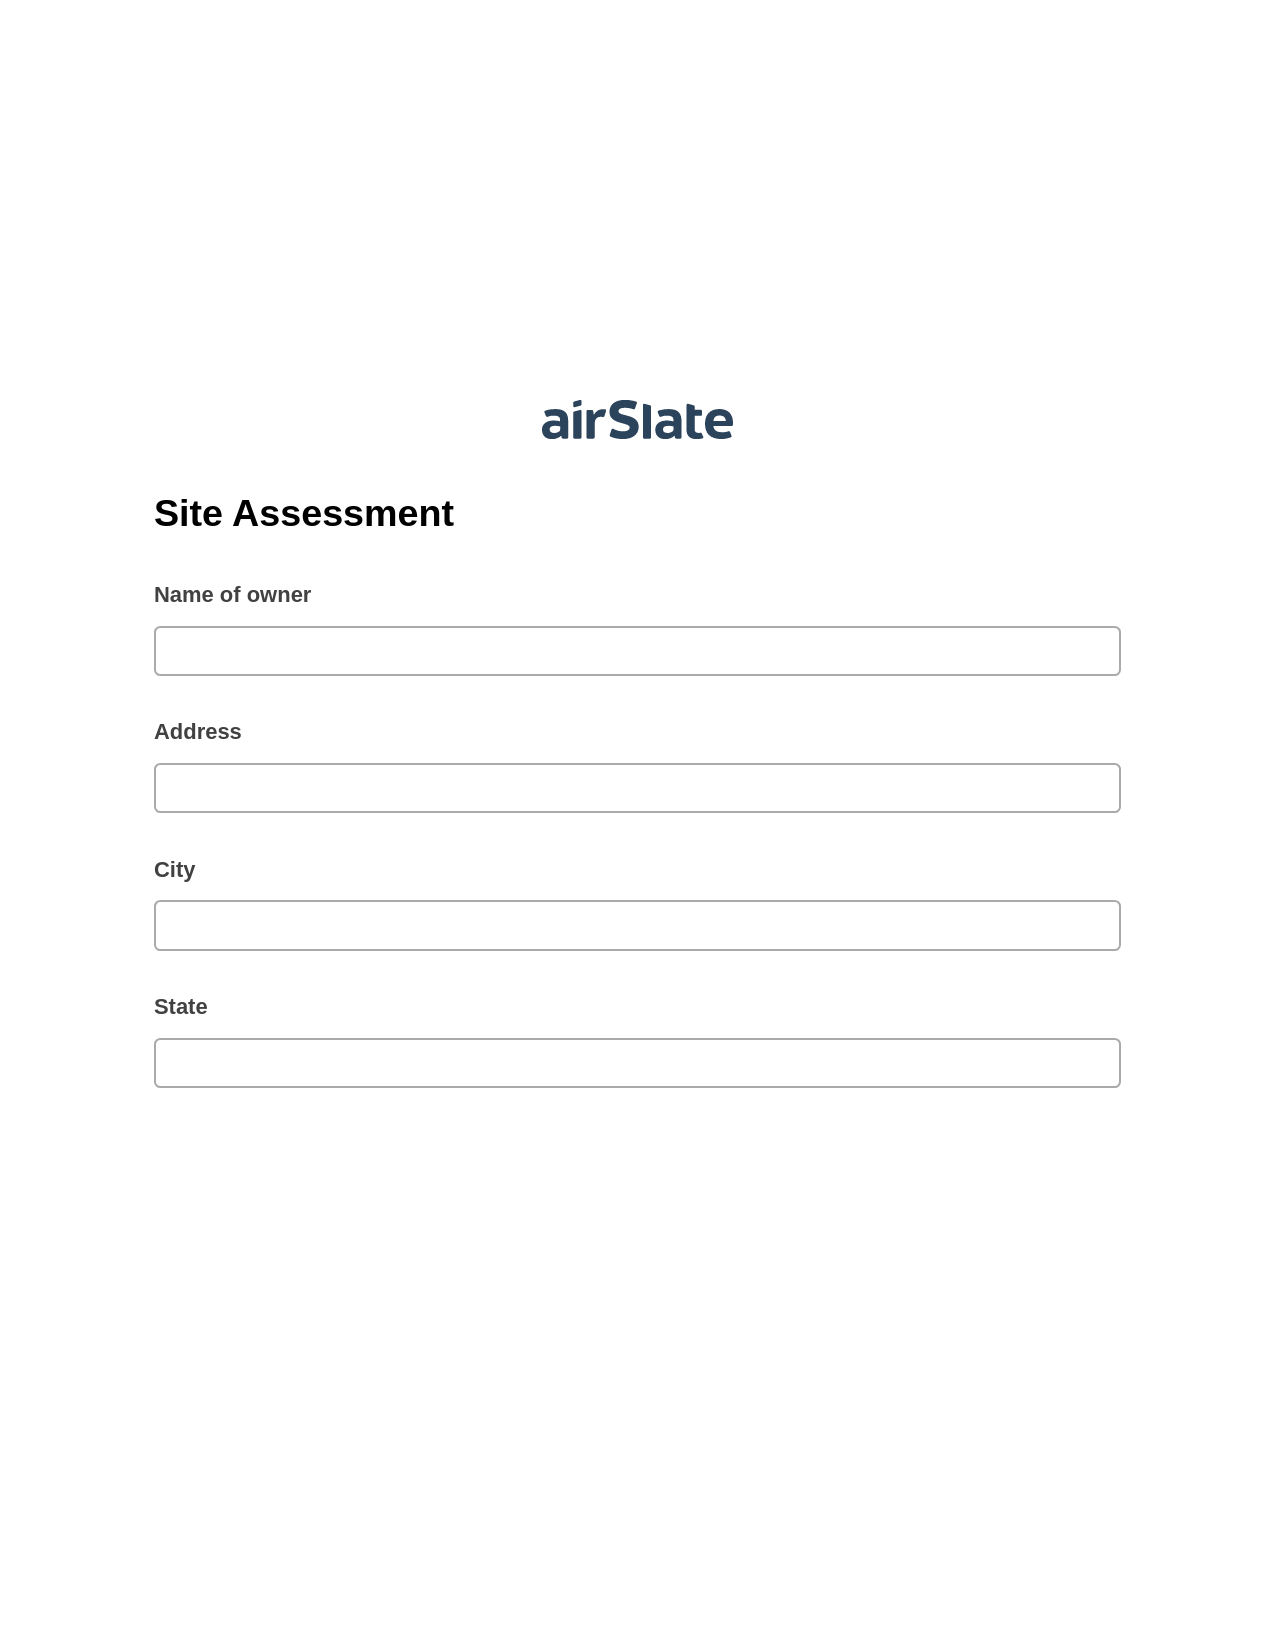 Site Assessment Pre-fill from Salesforce Record Bot, Update Salesforce Record Bot, Export to Smartsheet